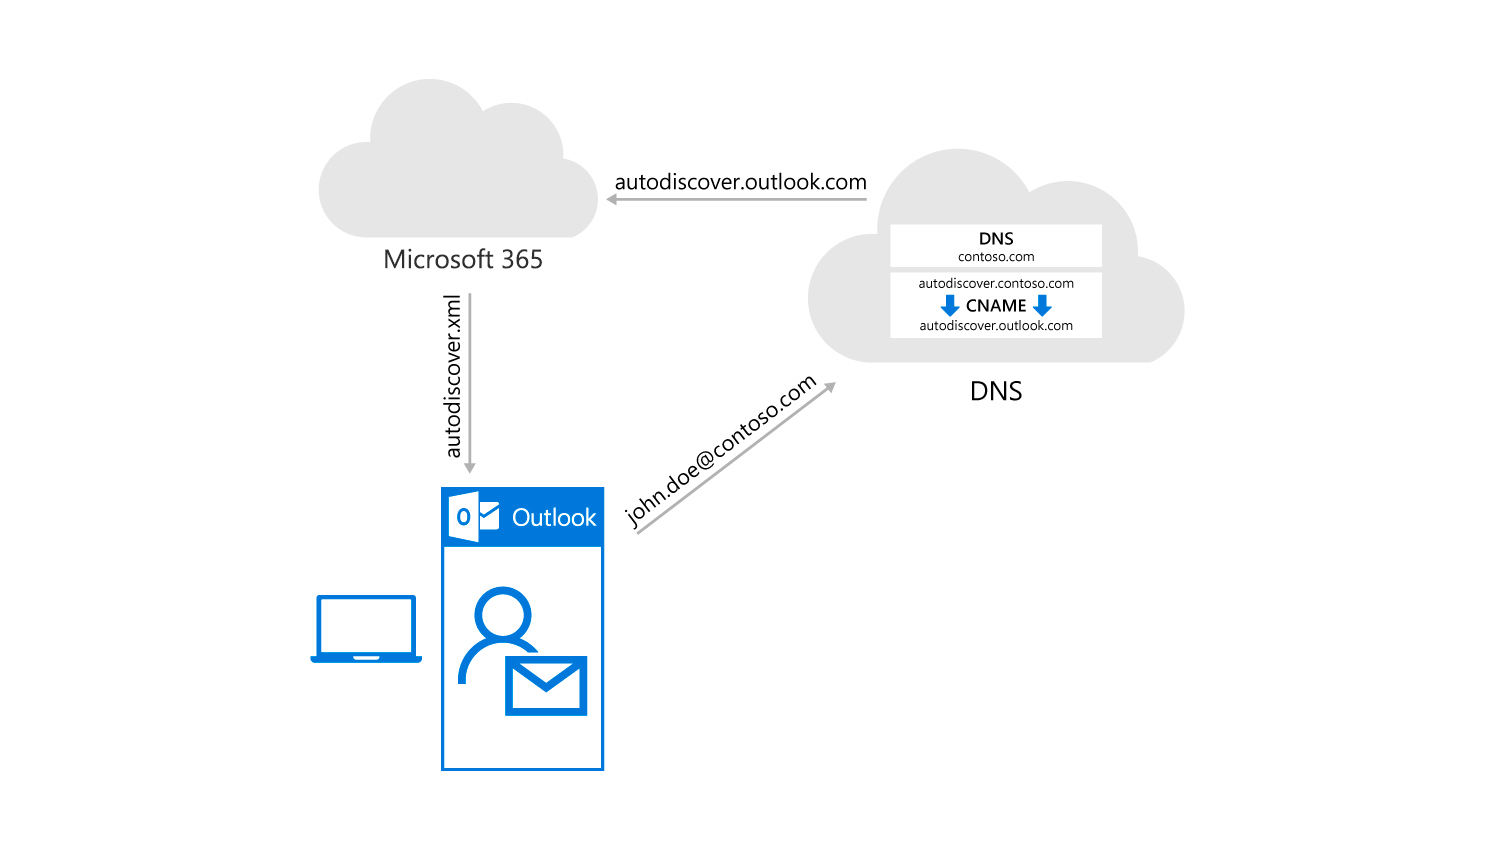 Diagram shows how the domain suffix of a user's email address is resolved and delivered to the Outlook client.